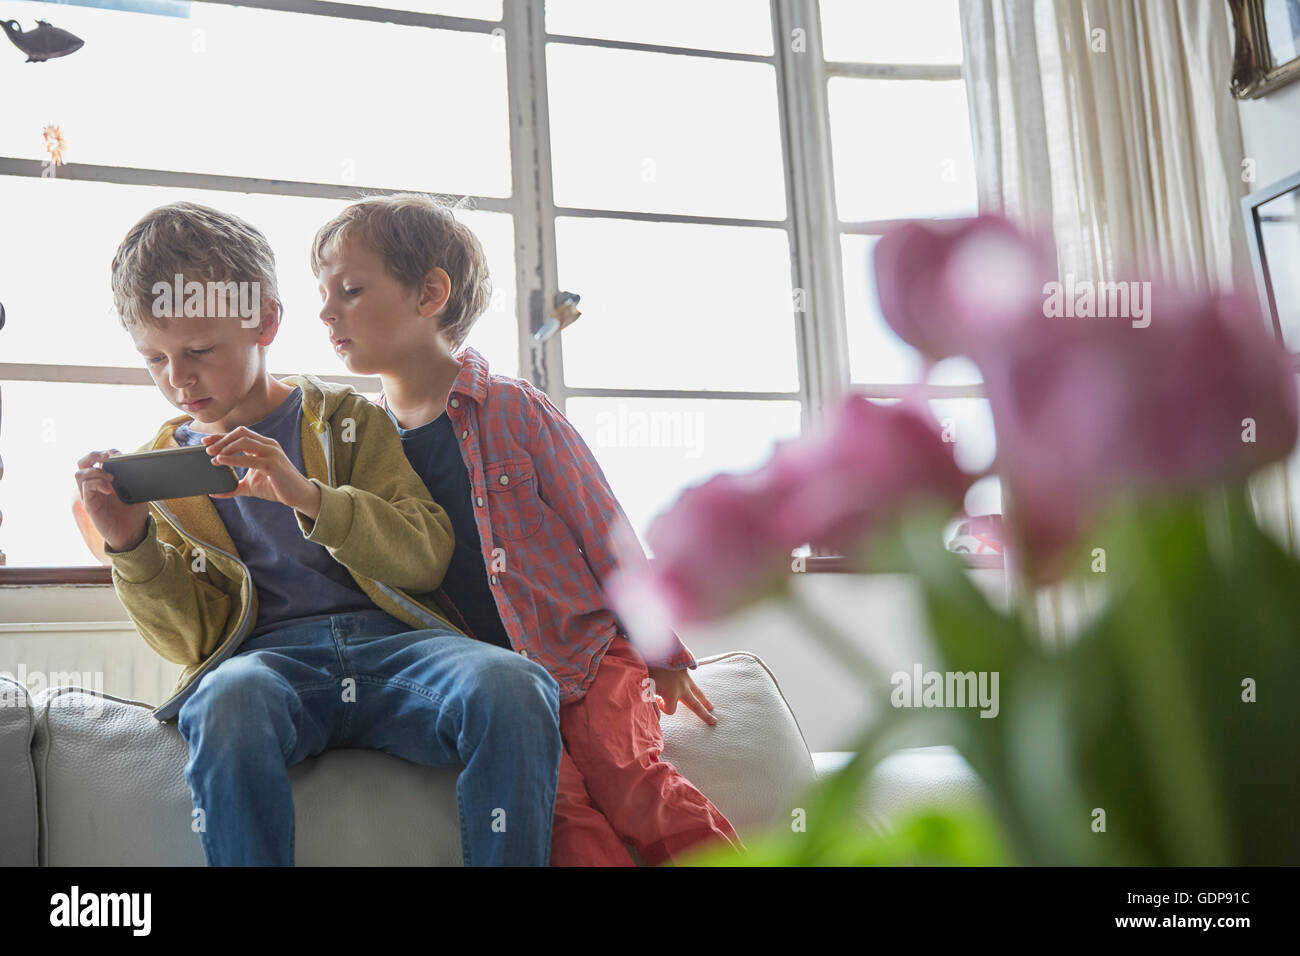 Boy sitting on sofa looking over brother shoulder at smartphone Stock Photo